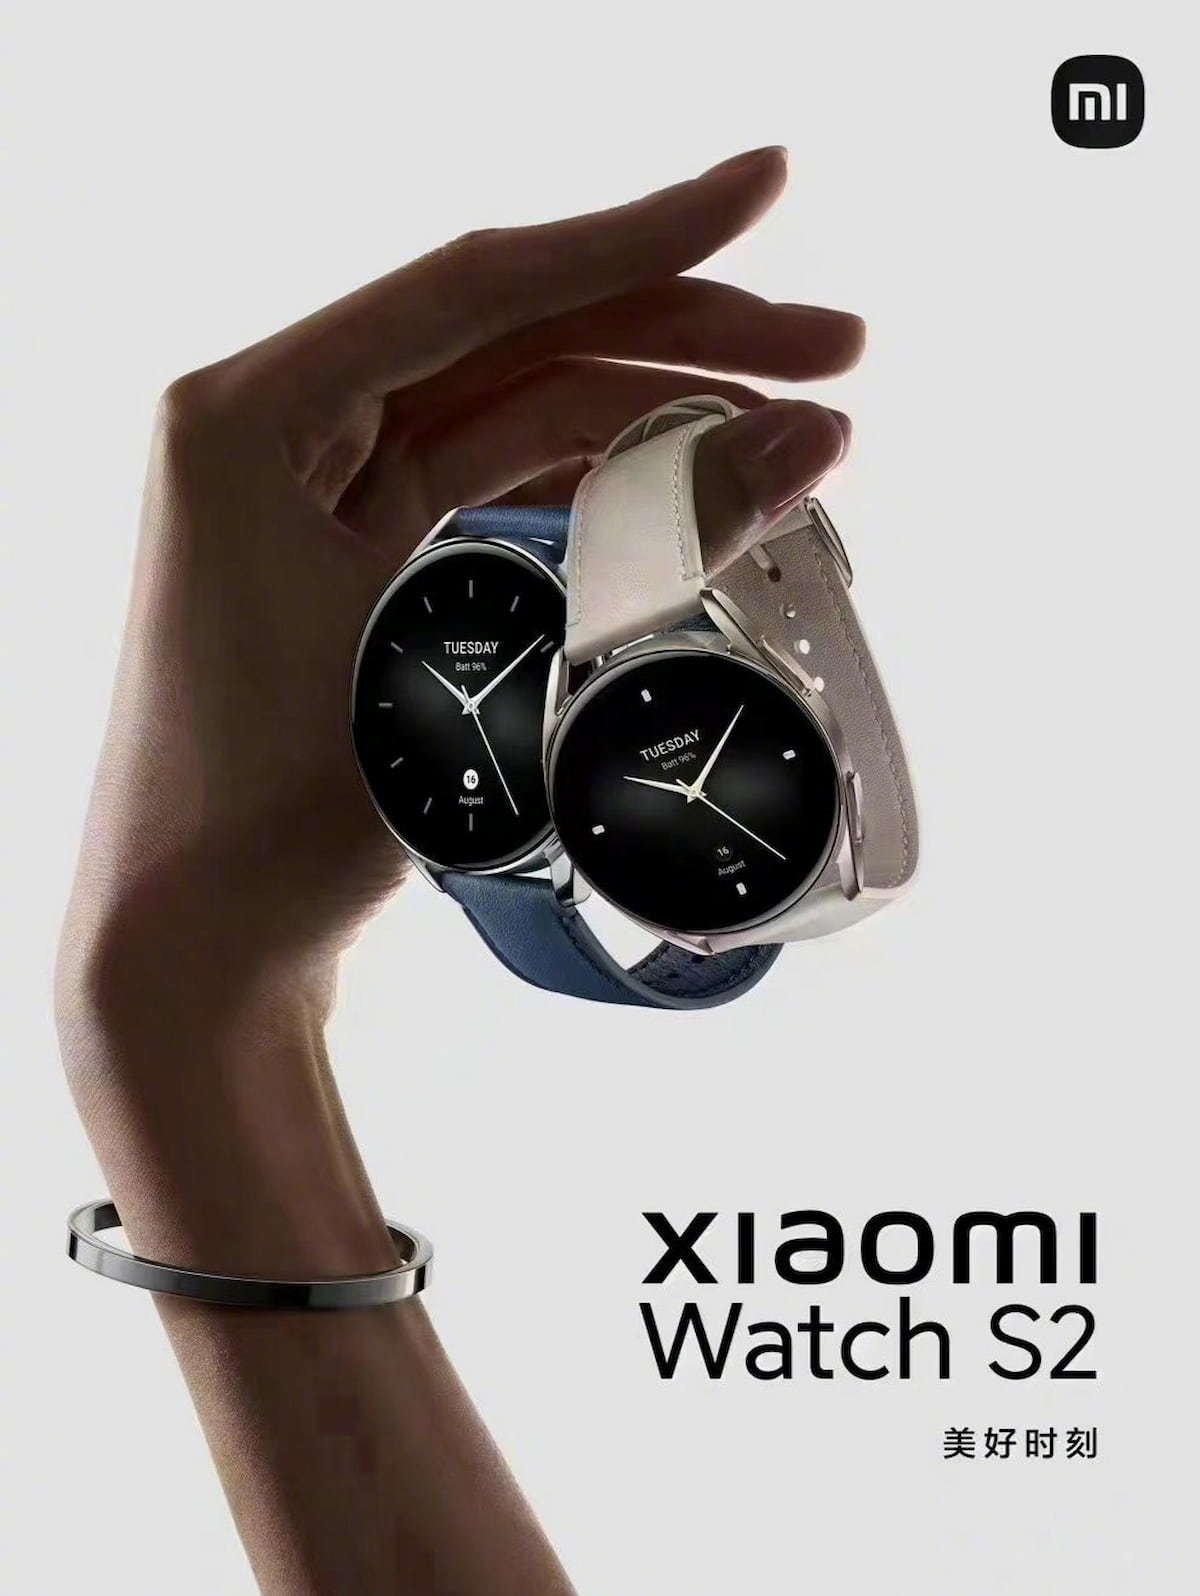 Official poster of the Xiaomi Watch S2